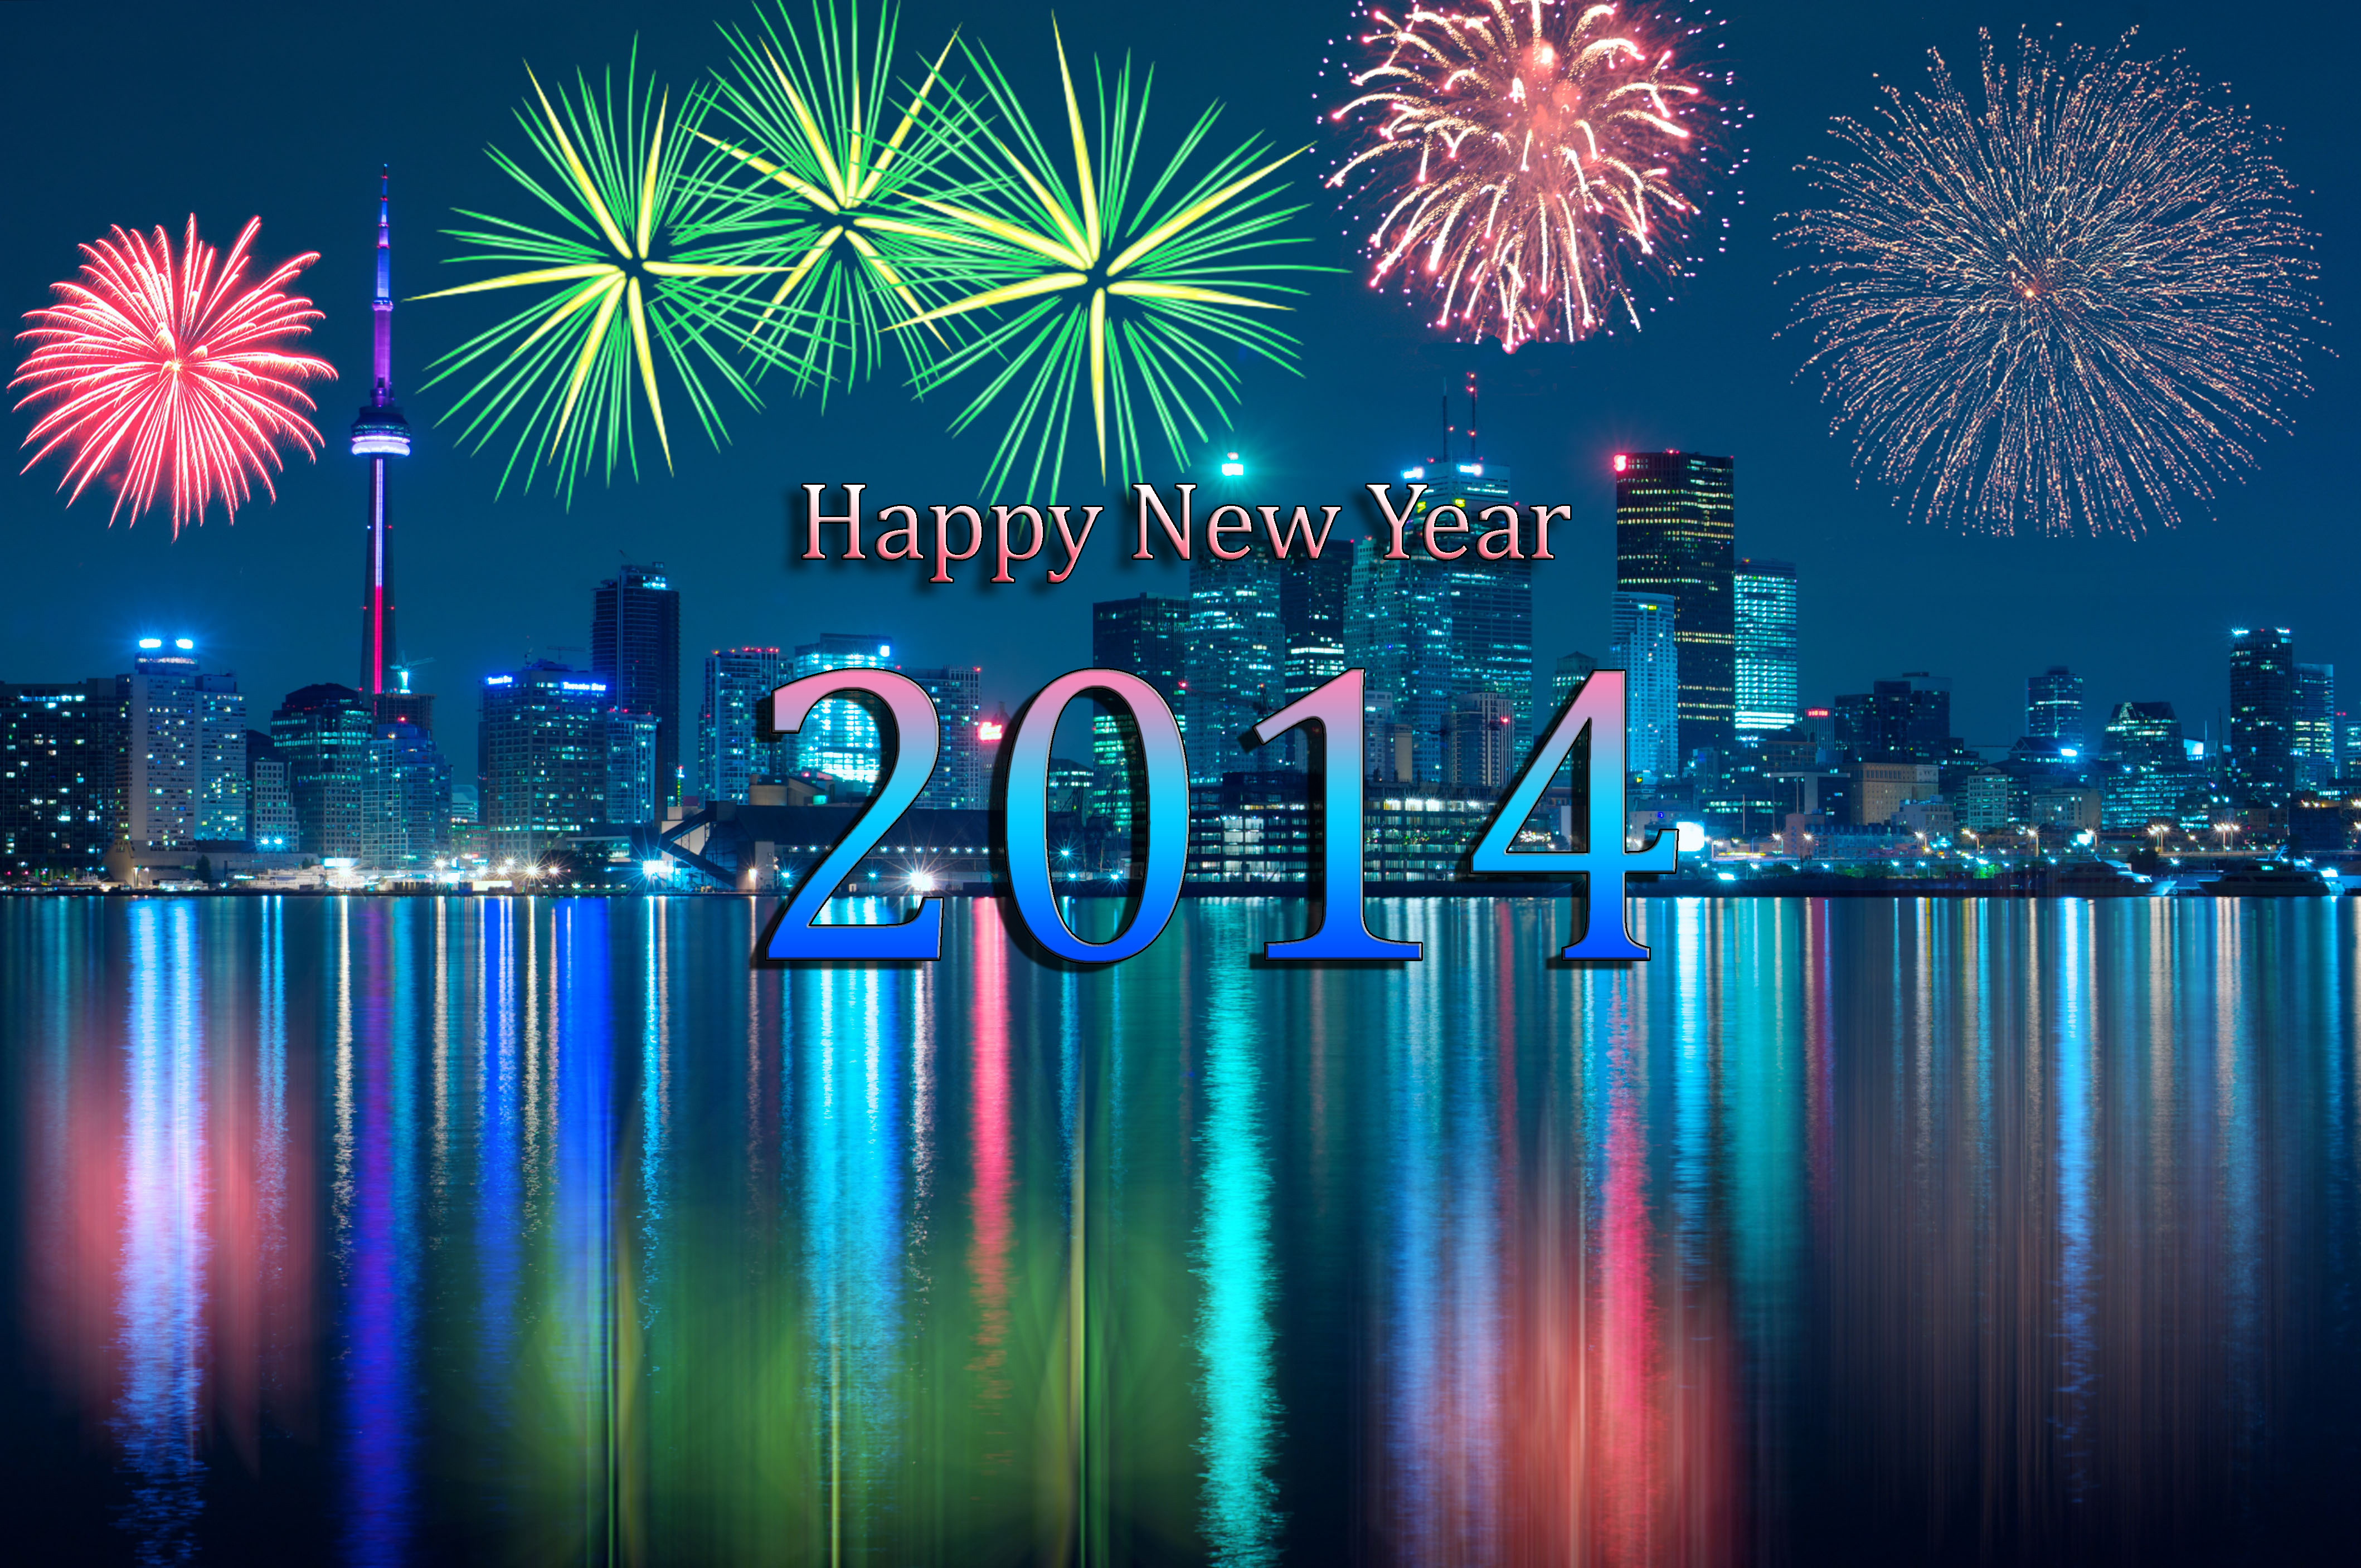 New Year 2014 on a background of fireworks wallpapers and images ...